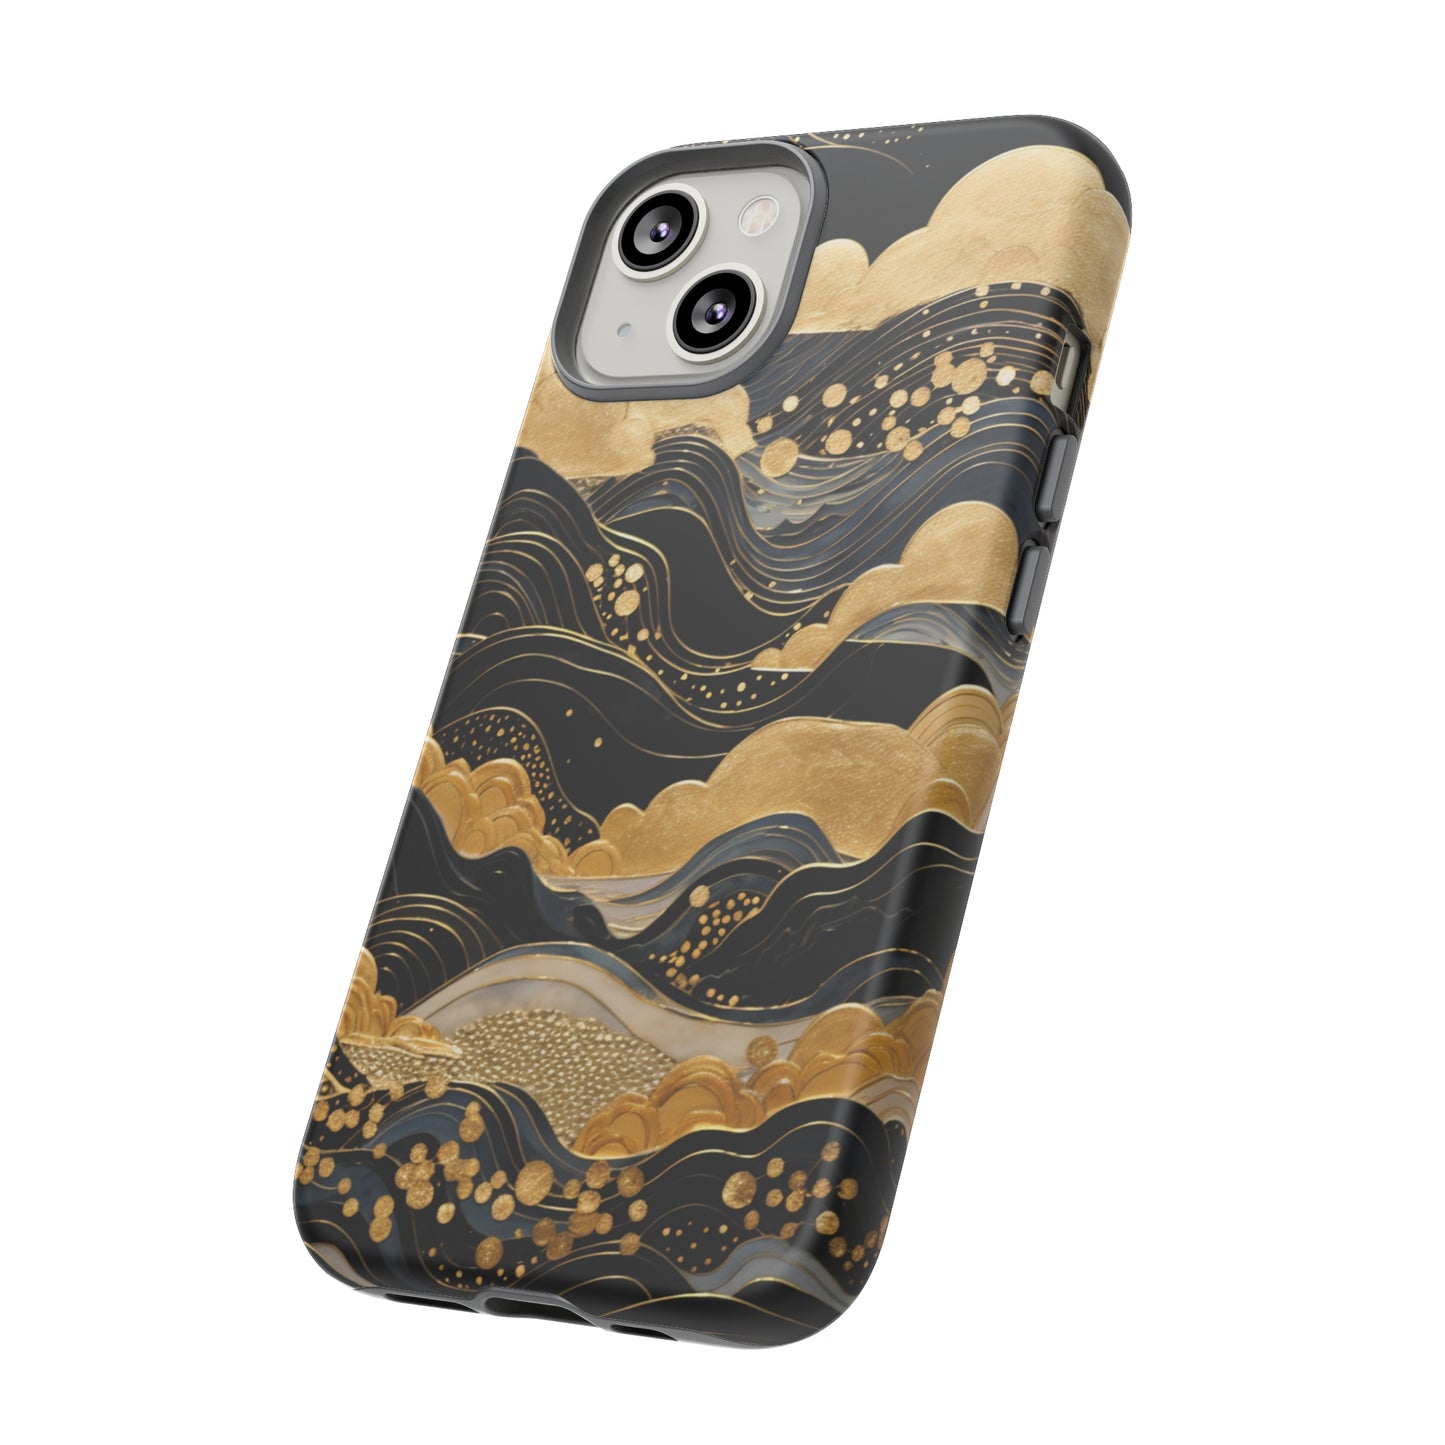 Chiyogami Mountains Tough Phone Case fits Galaxy S23 S22 S21 S20 Plus Ultra | Iphone 14 13 12 11 8 Pro Max Mini | Pixel 7 6 Pro 5 | Japanese